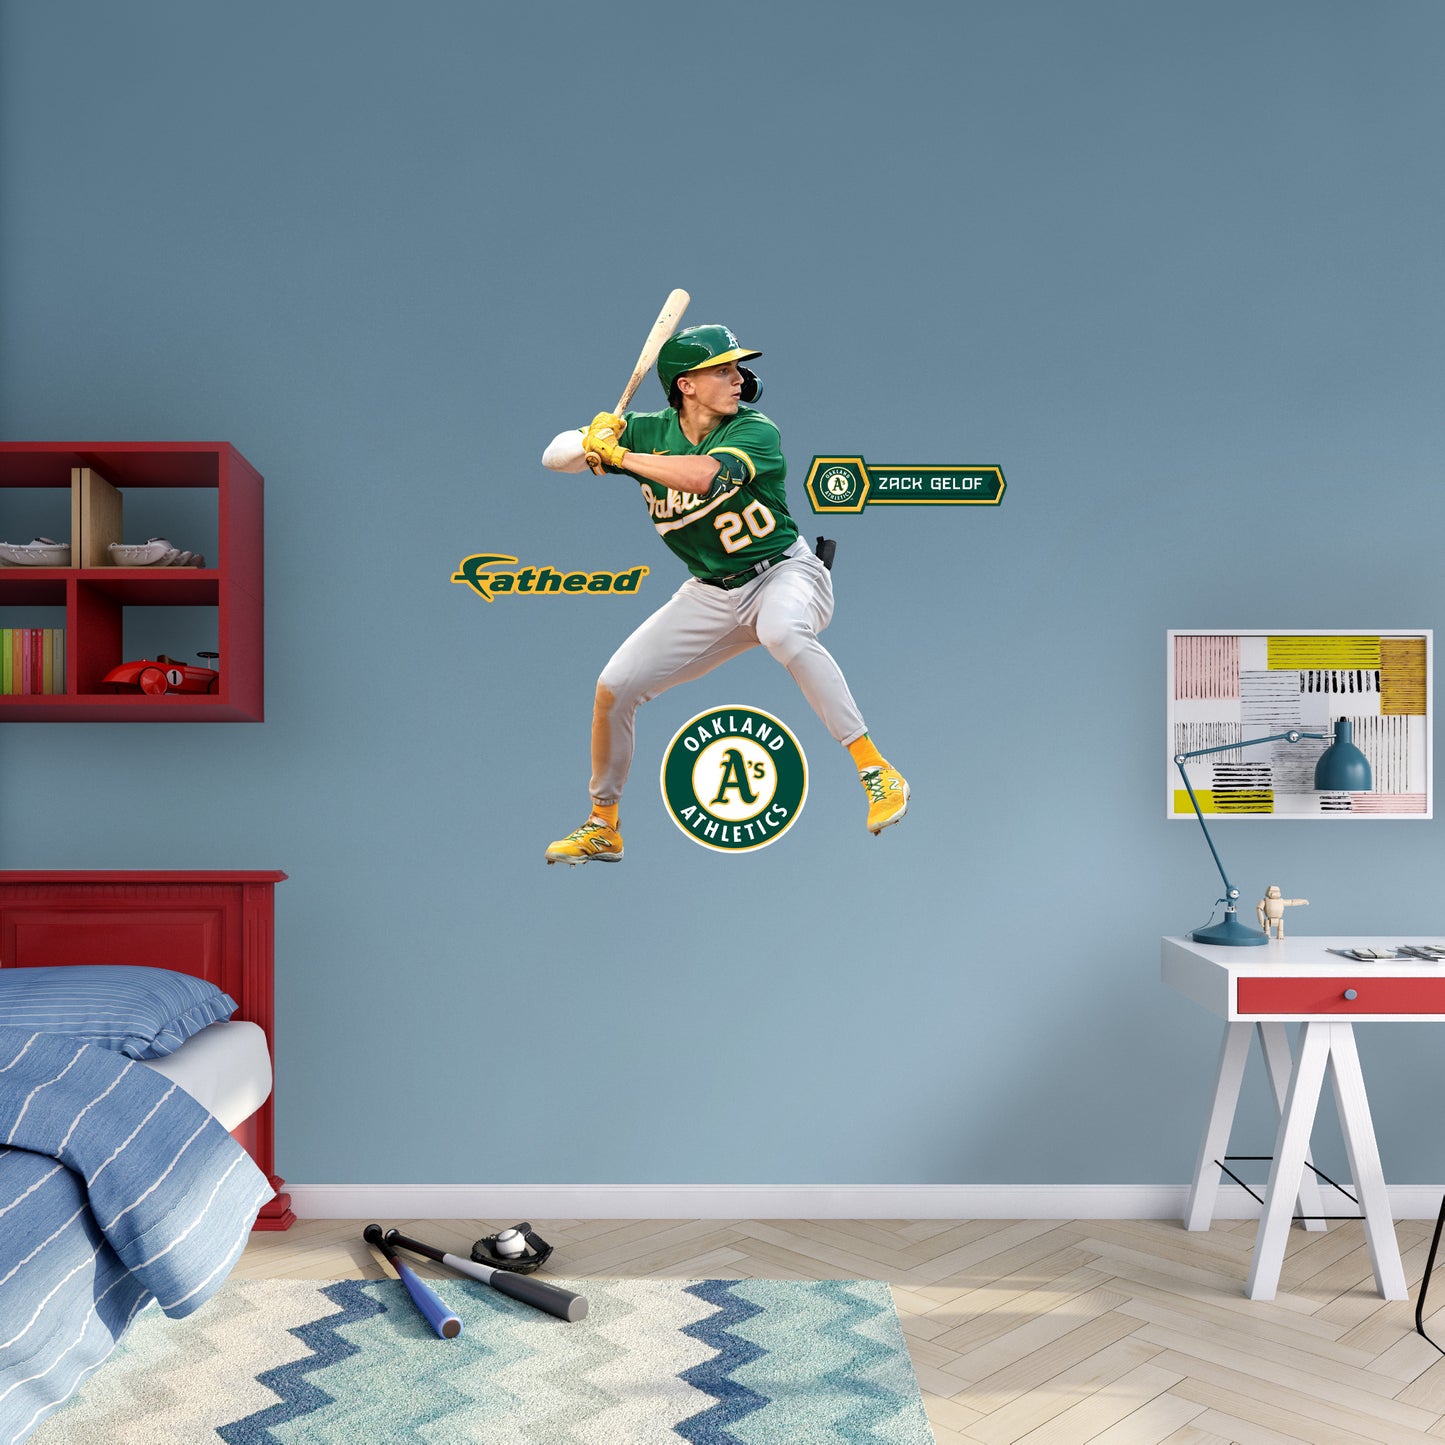 Oakland Athletics: Zack Gelof         - Officially Licensed MLB Removable     Adhesive Decal